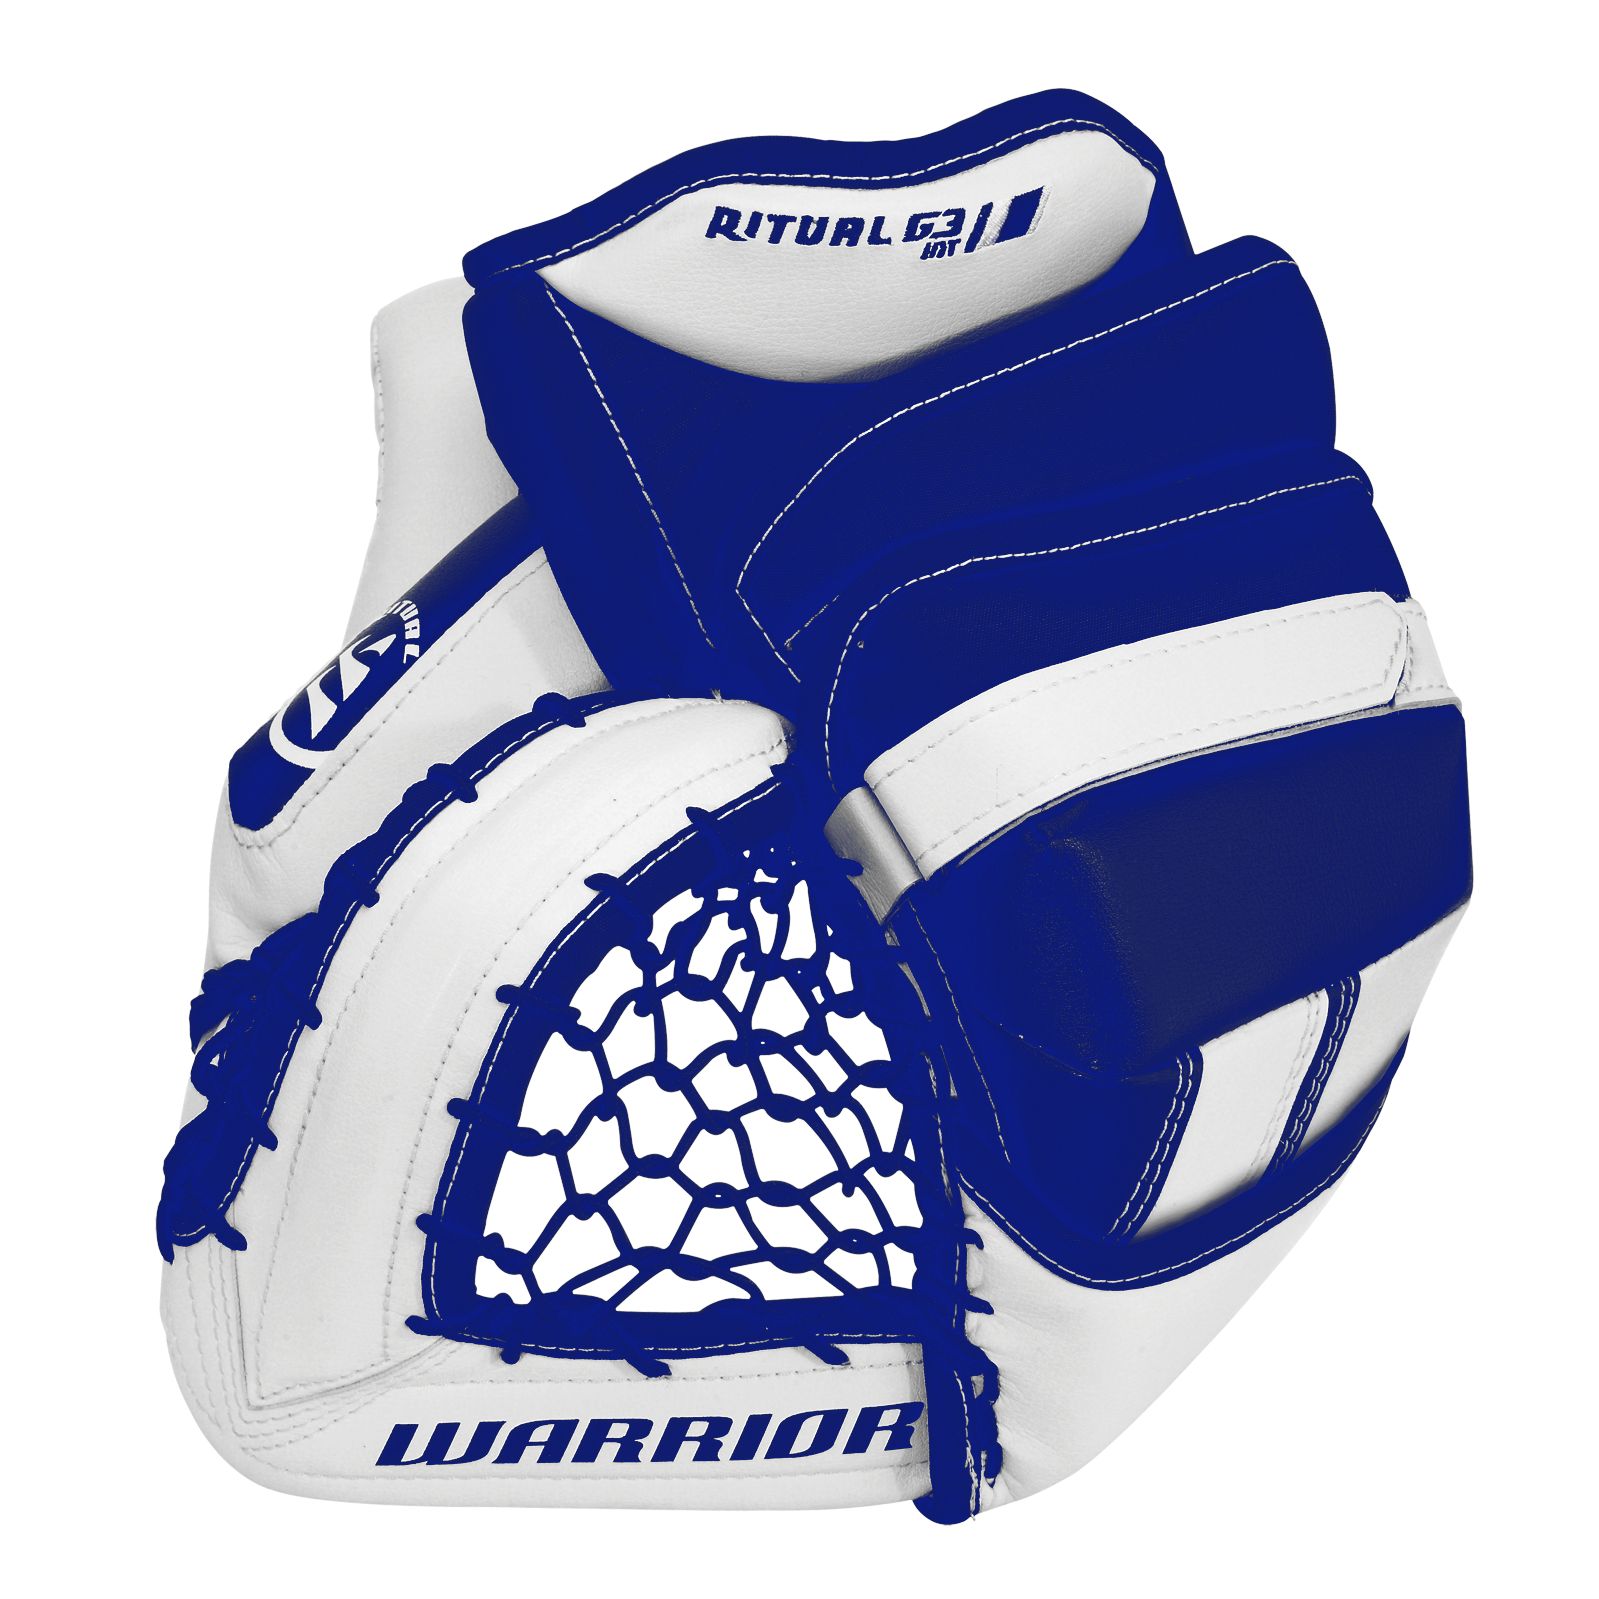 Ritual G3 Int. Trapper, White with Royal Blue image number 1